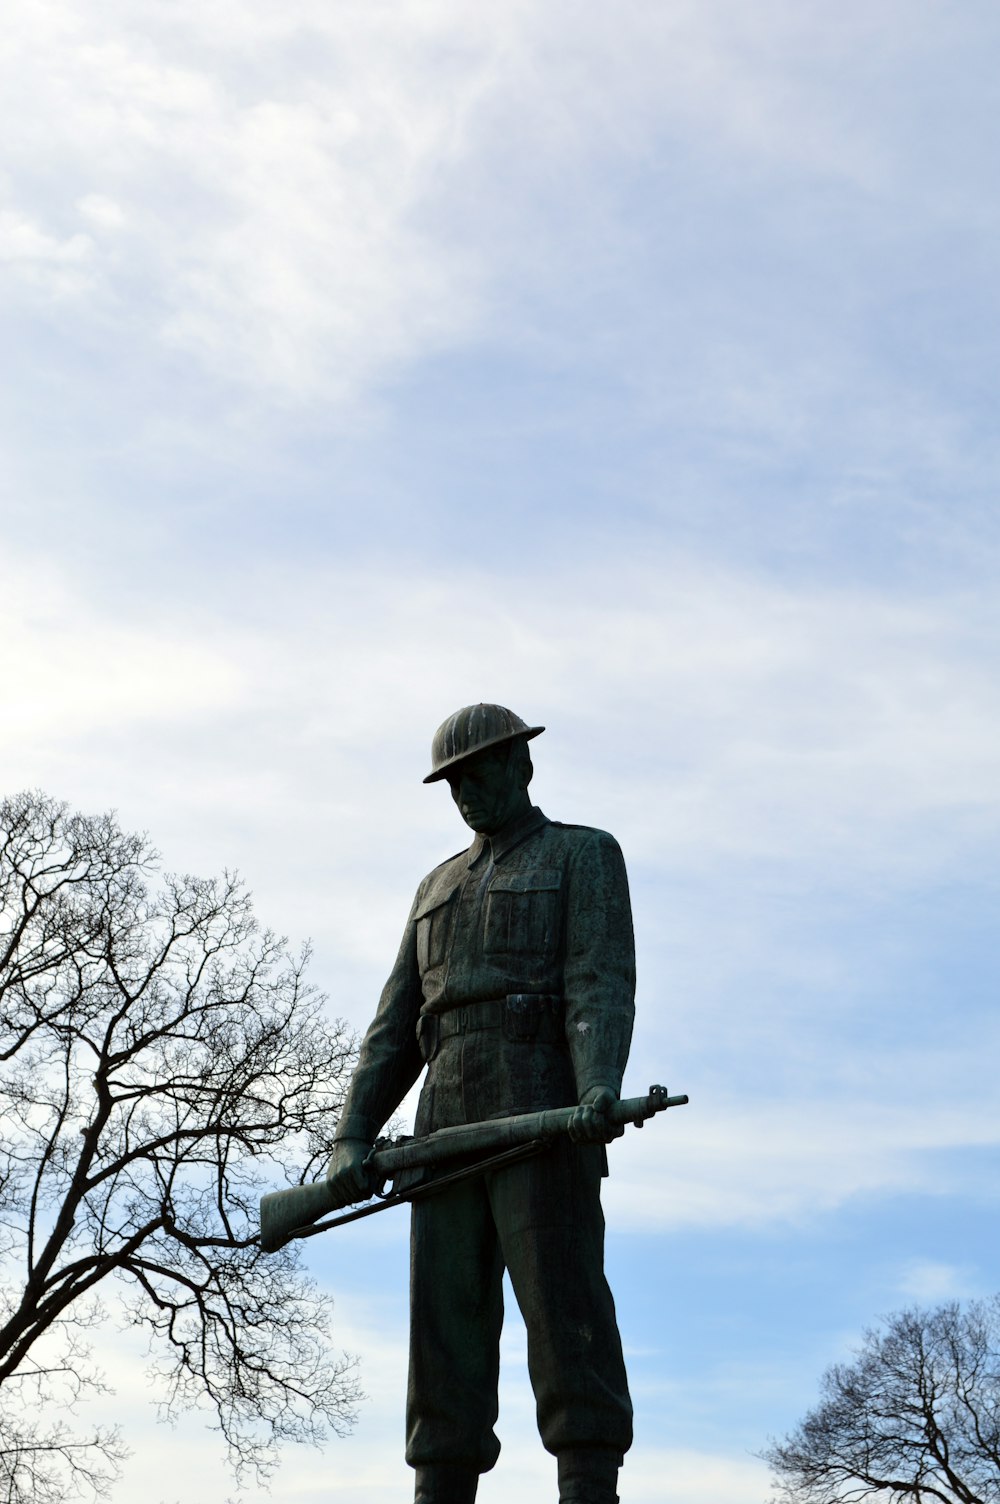 a statue of a soldier holding a rifle